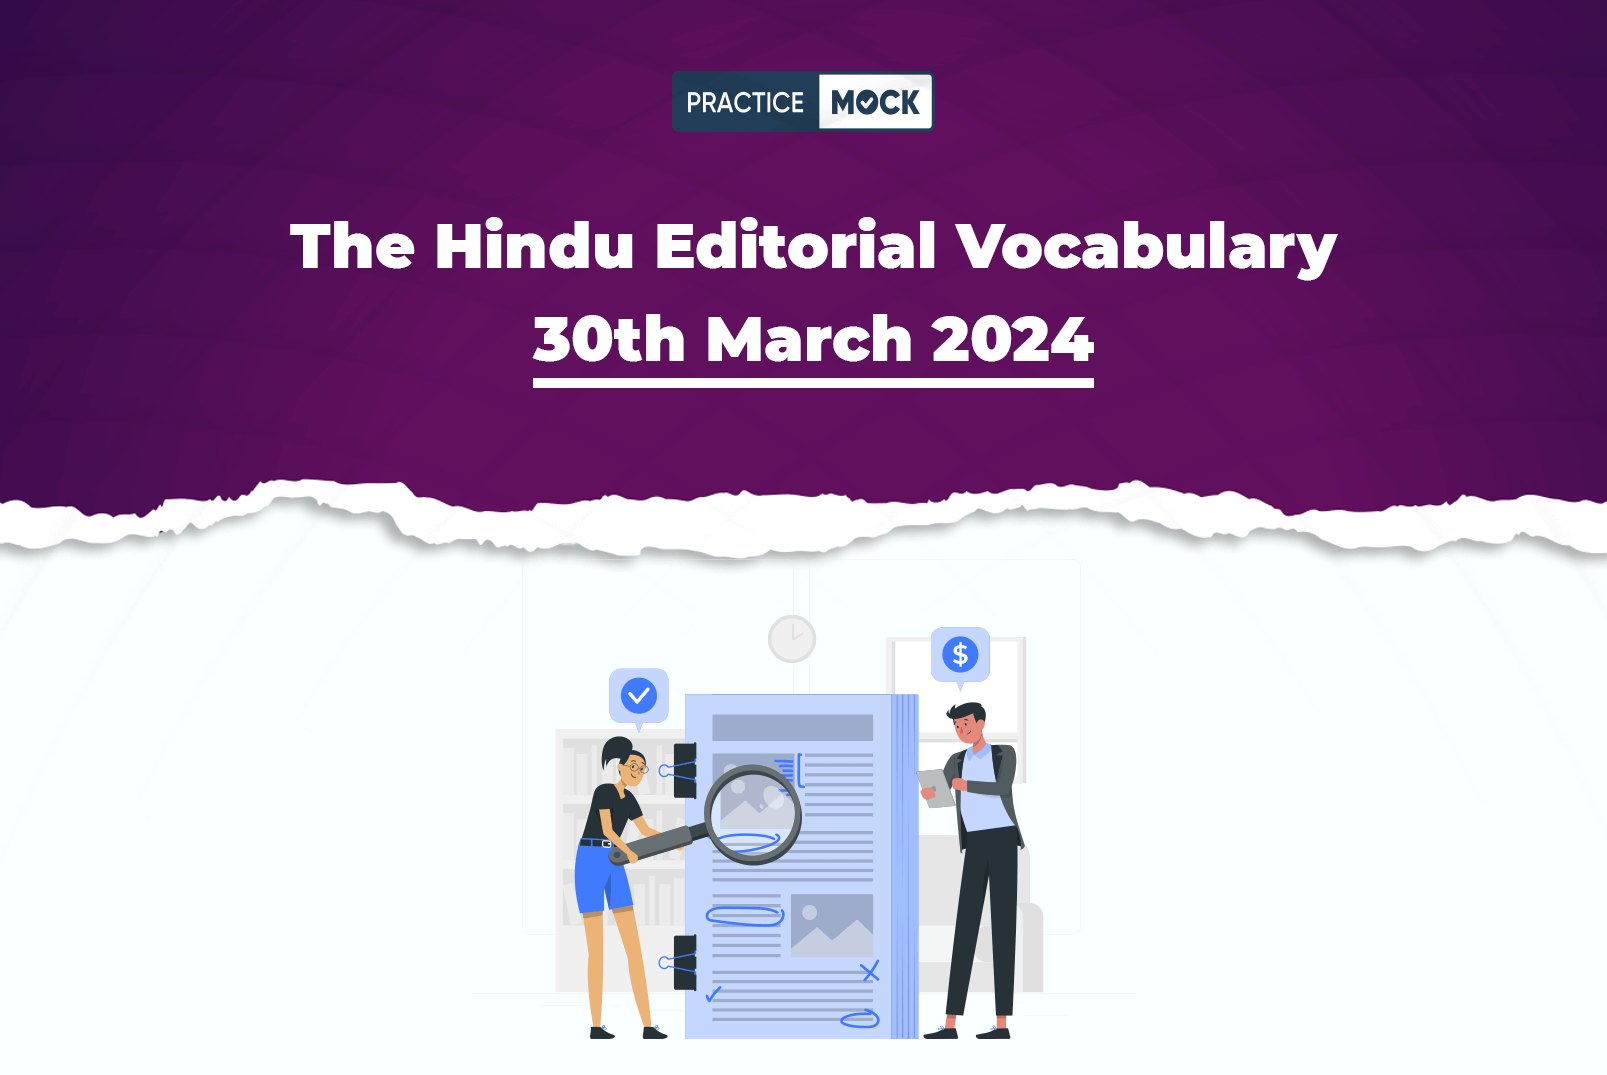 The Hindu Editorial Vocabulary 30th March 2024